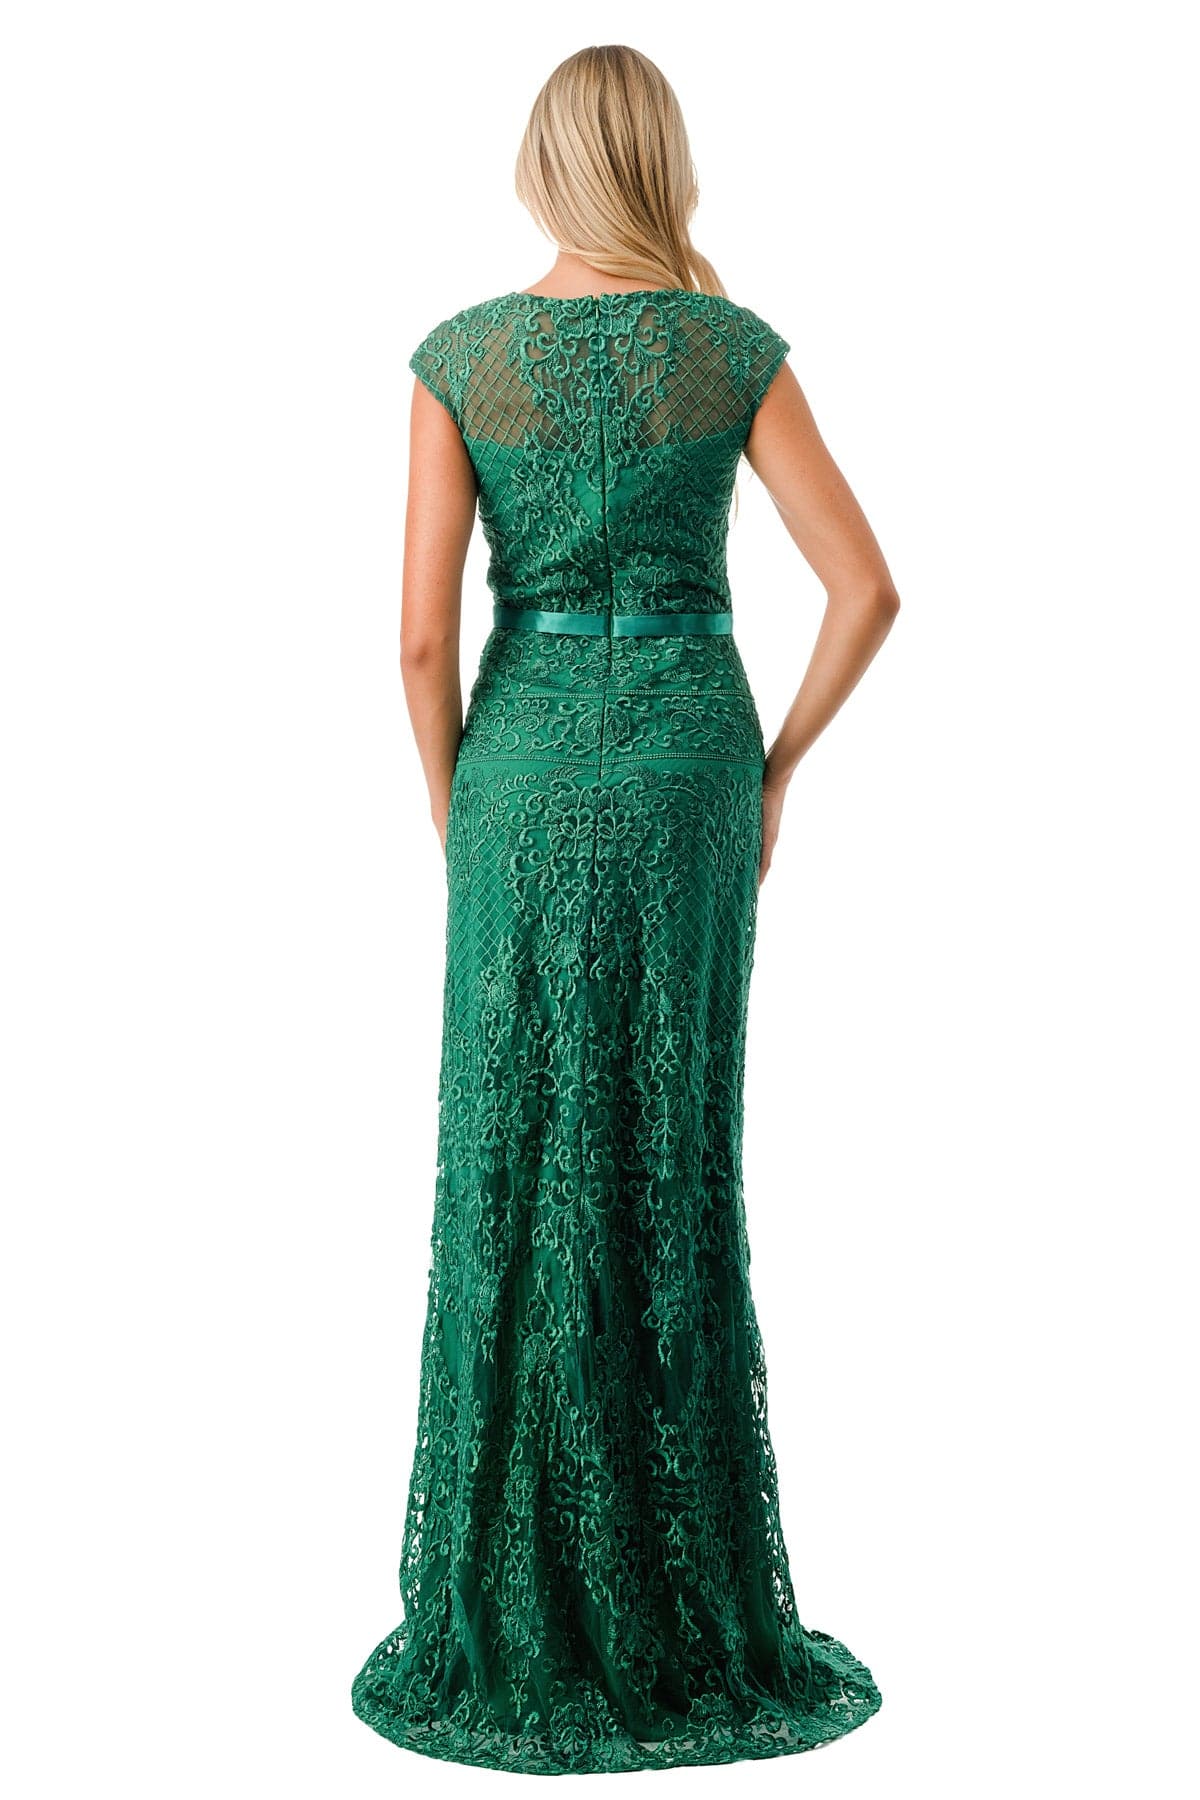 Aspeed M2732 Cap Sleeve Lace Embroidered Dress - NORMA REED